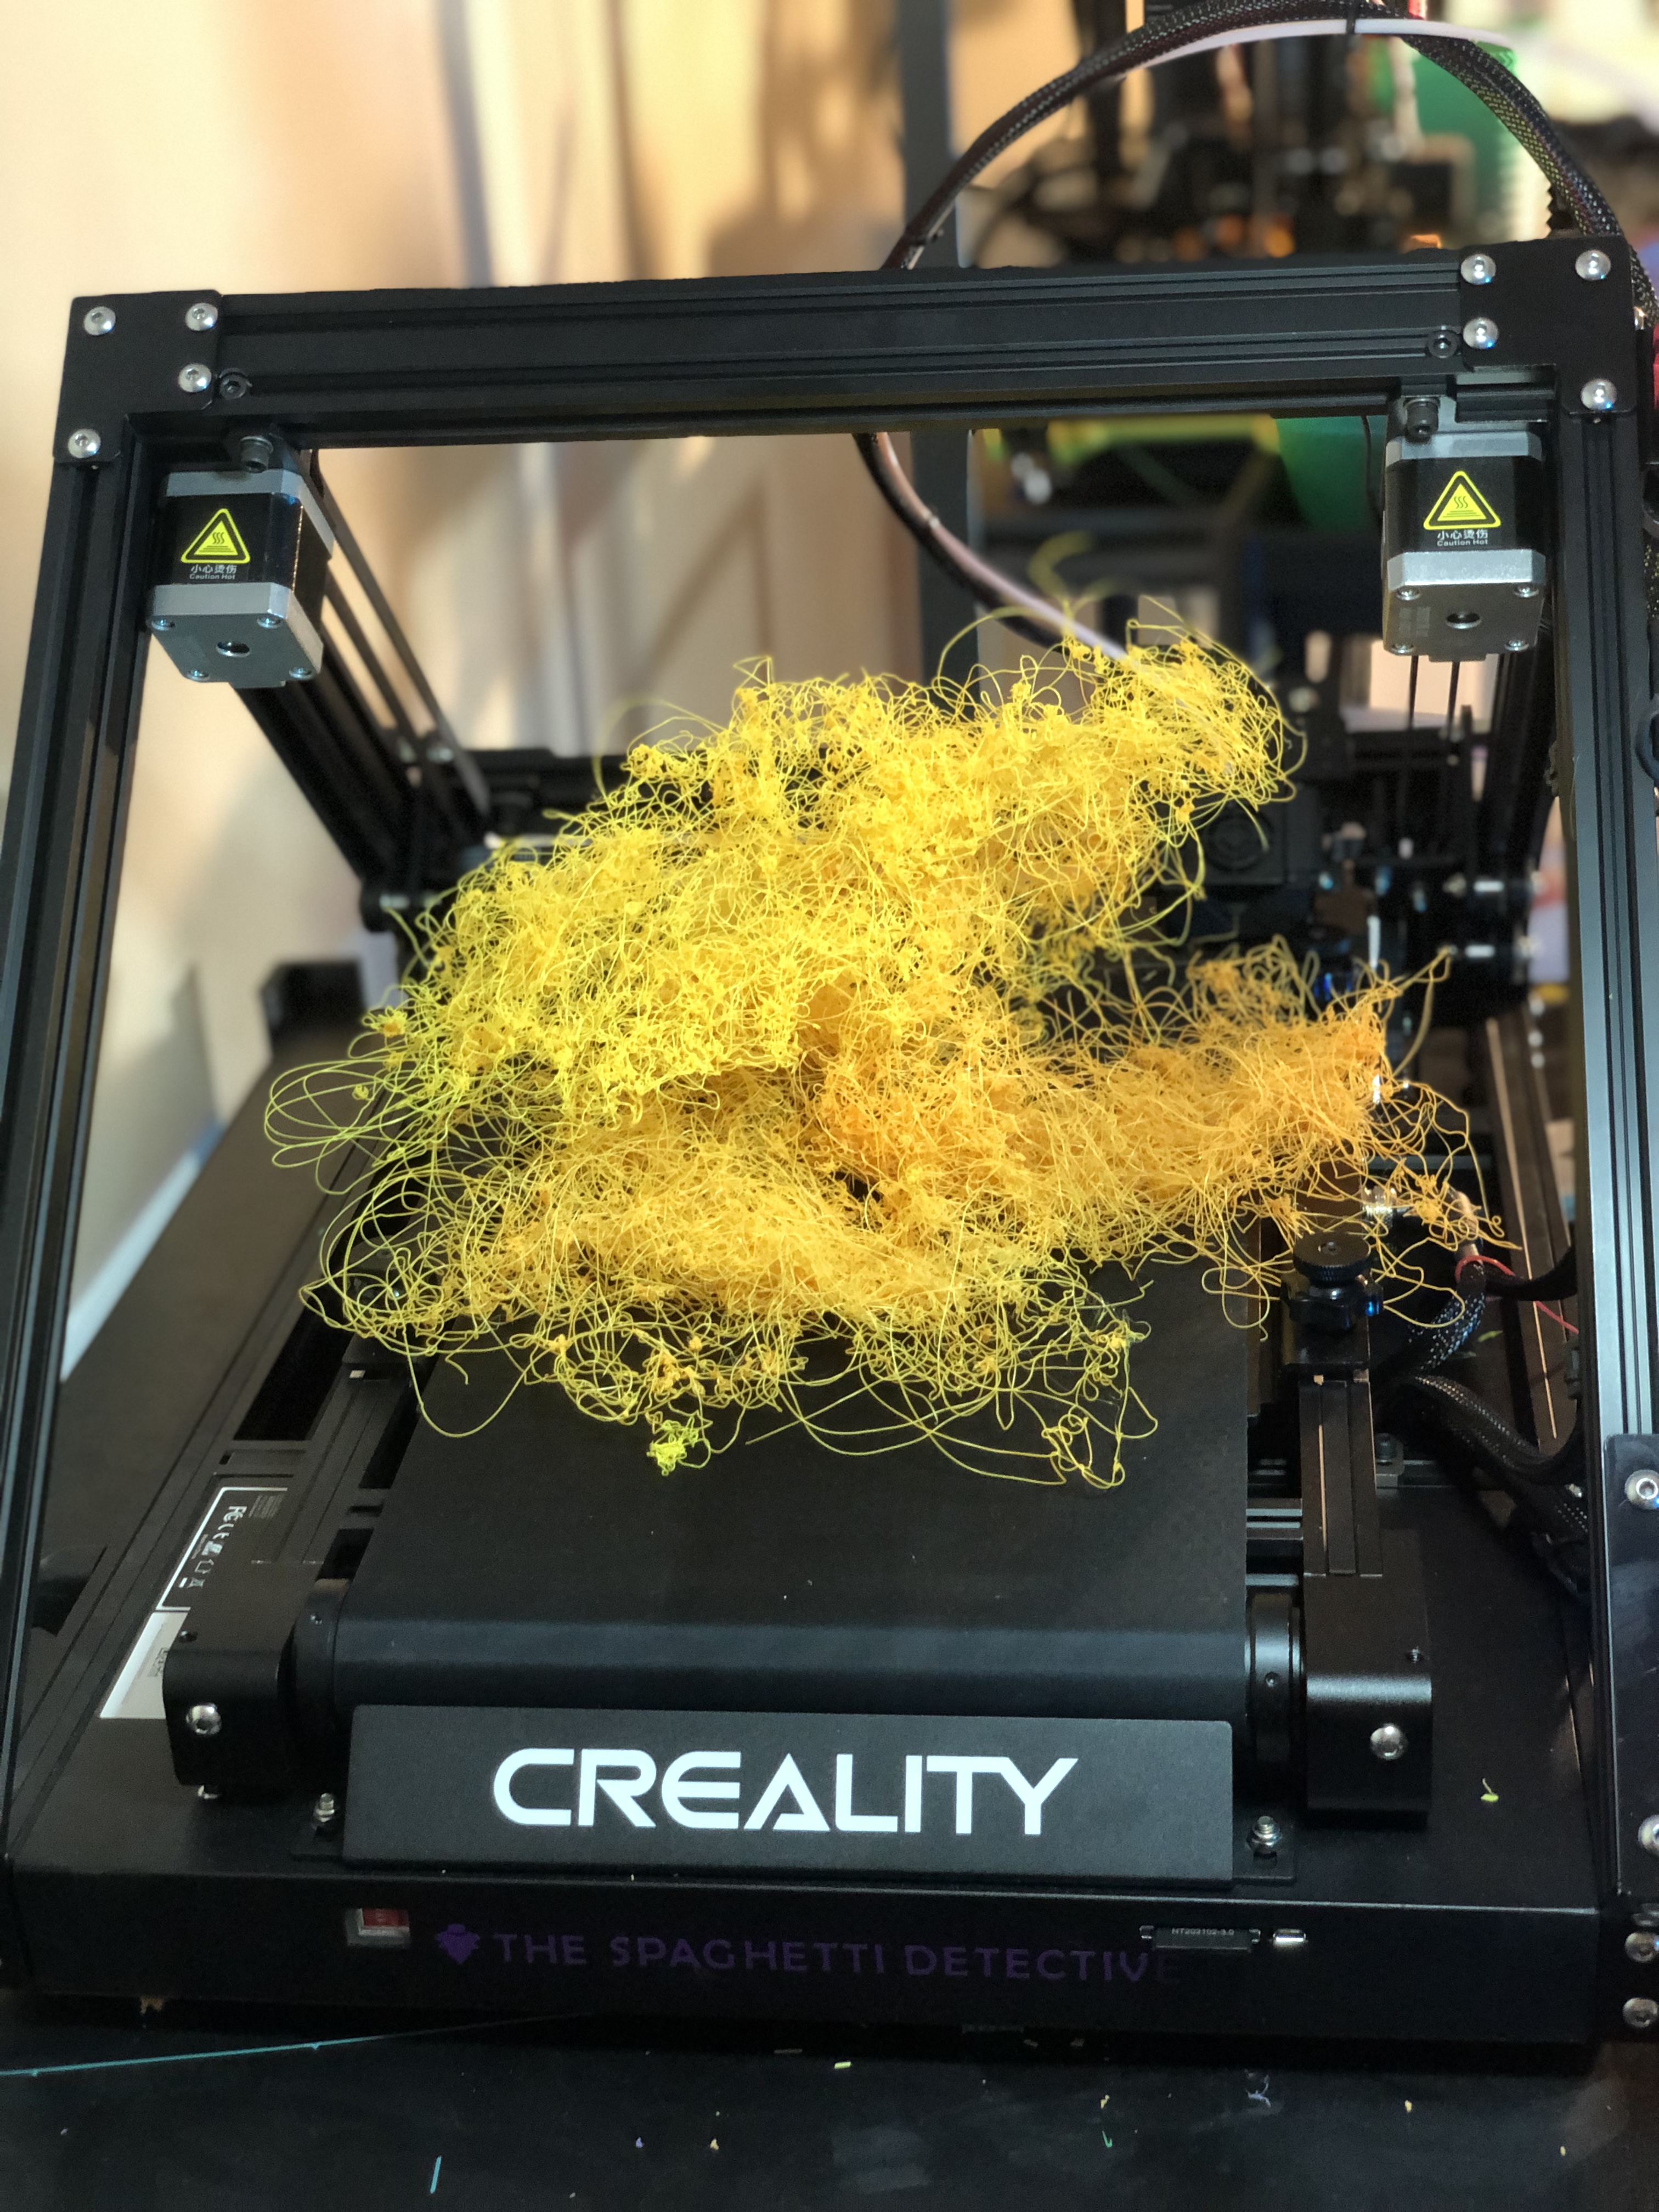 kort Ring tilbage kort 3D Printer Issues and How to Troubleshoot them | Obico Knowledge Base